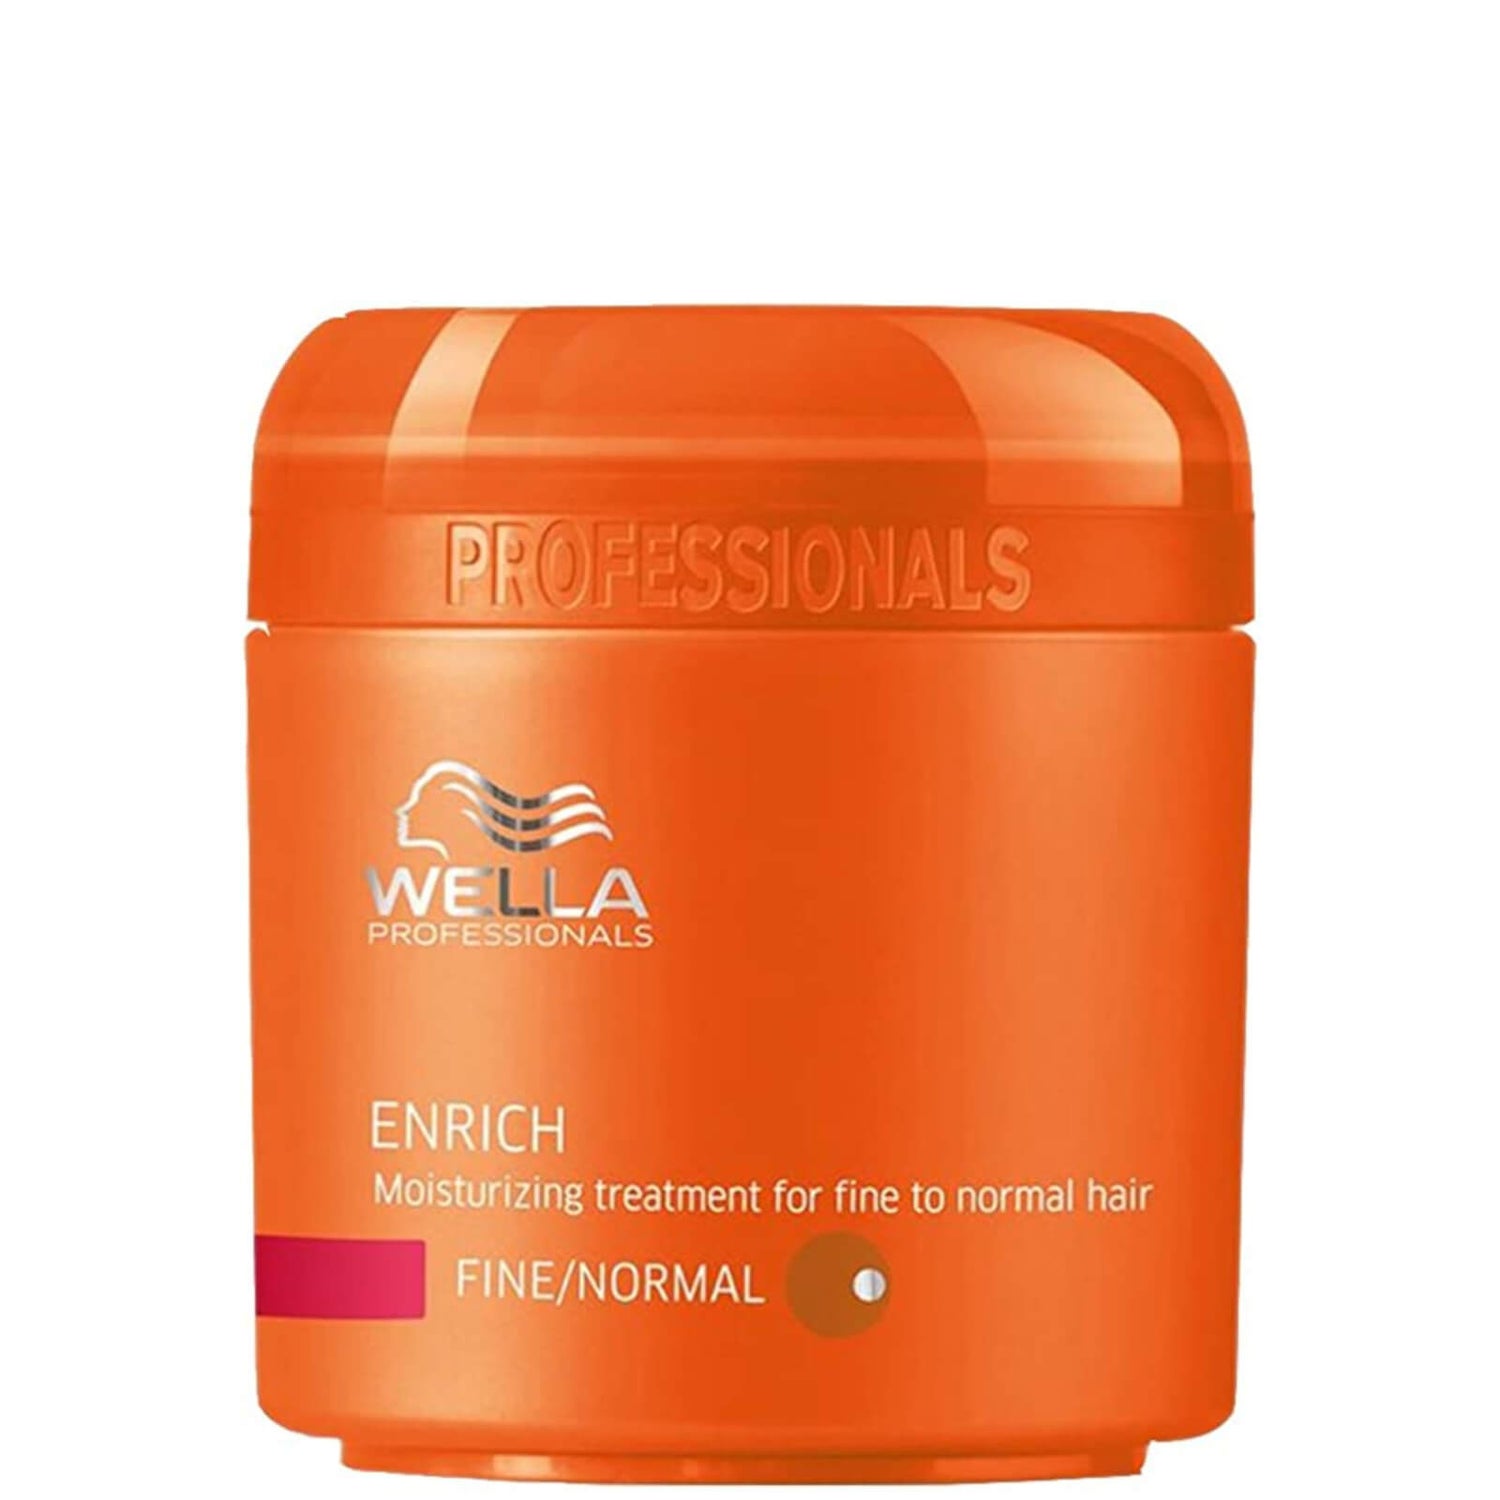 Wella Professionals Enrich Moisturizing Treatment For Fine To Normal Hair (5oz)